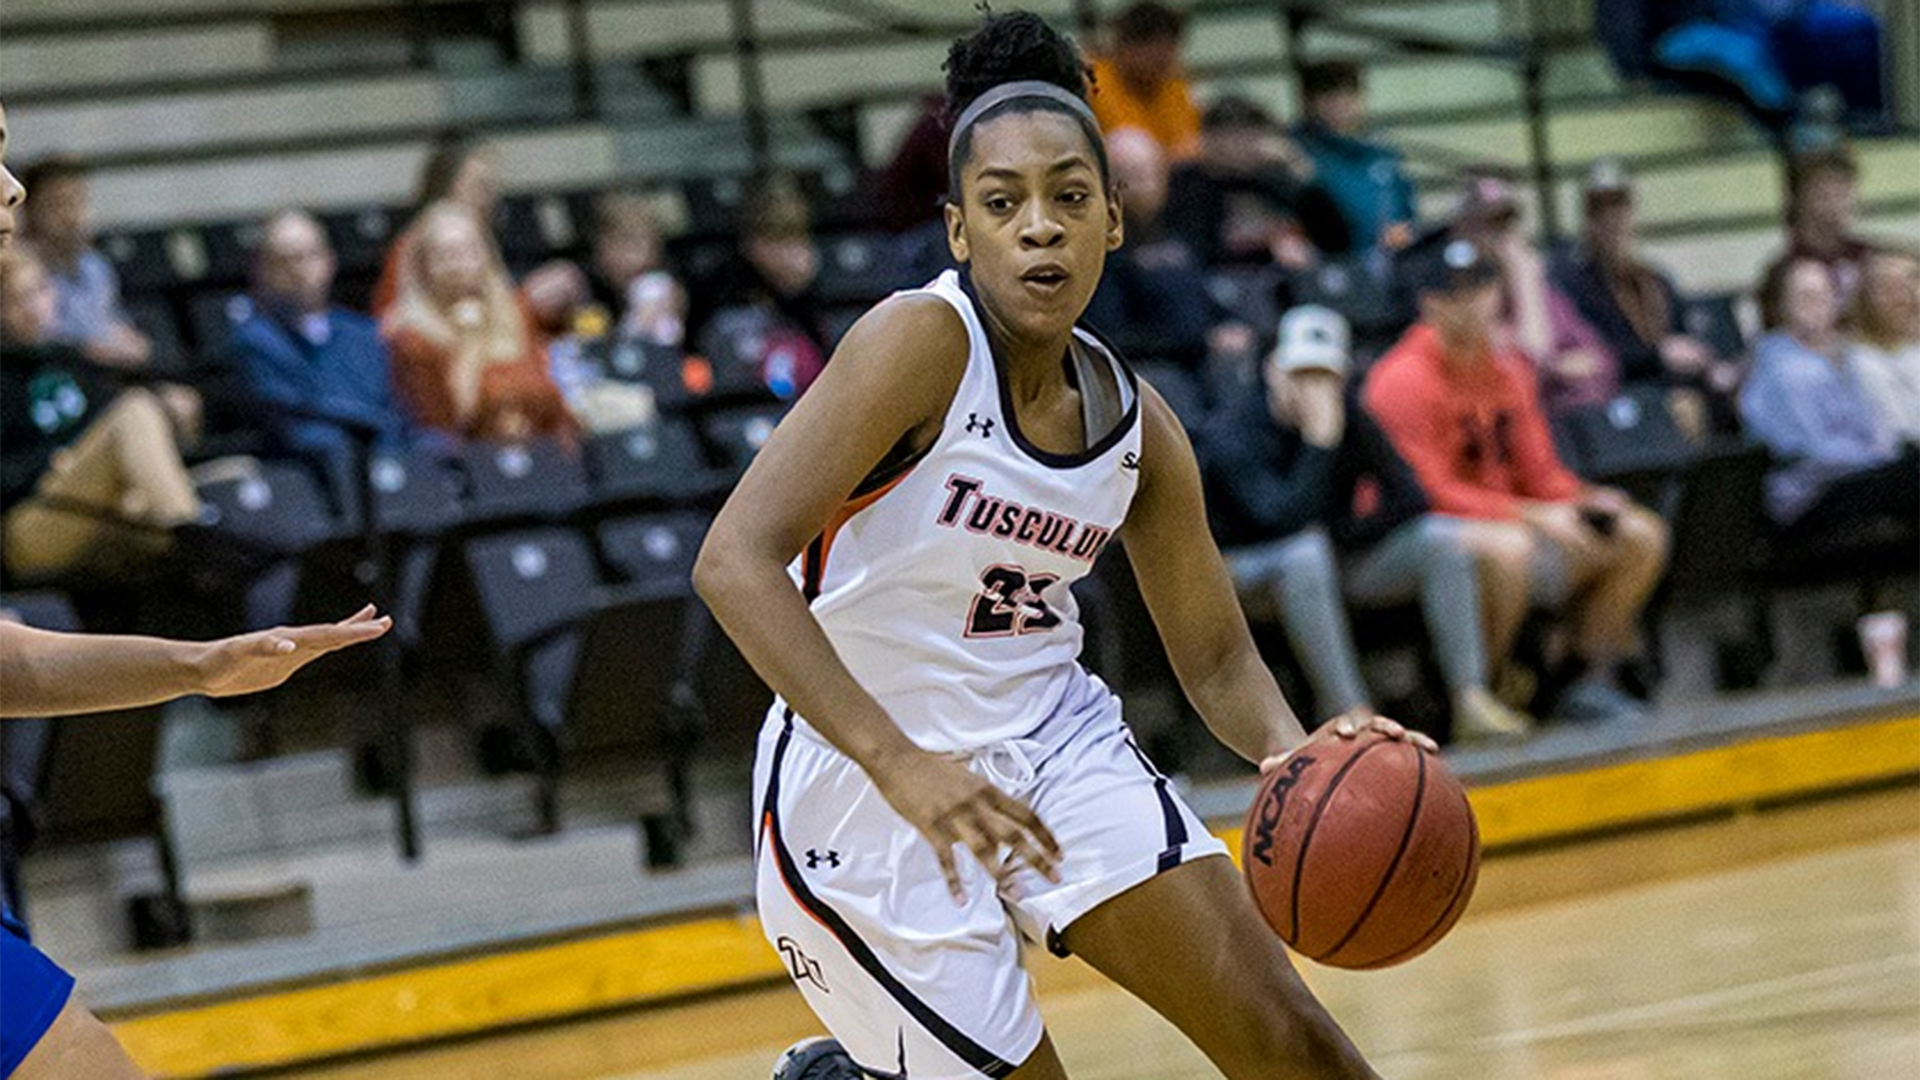 Pioneers set SAC tourney record with 14 threes, rout Wingate 82-40